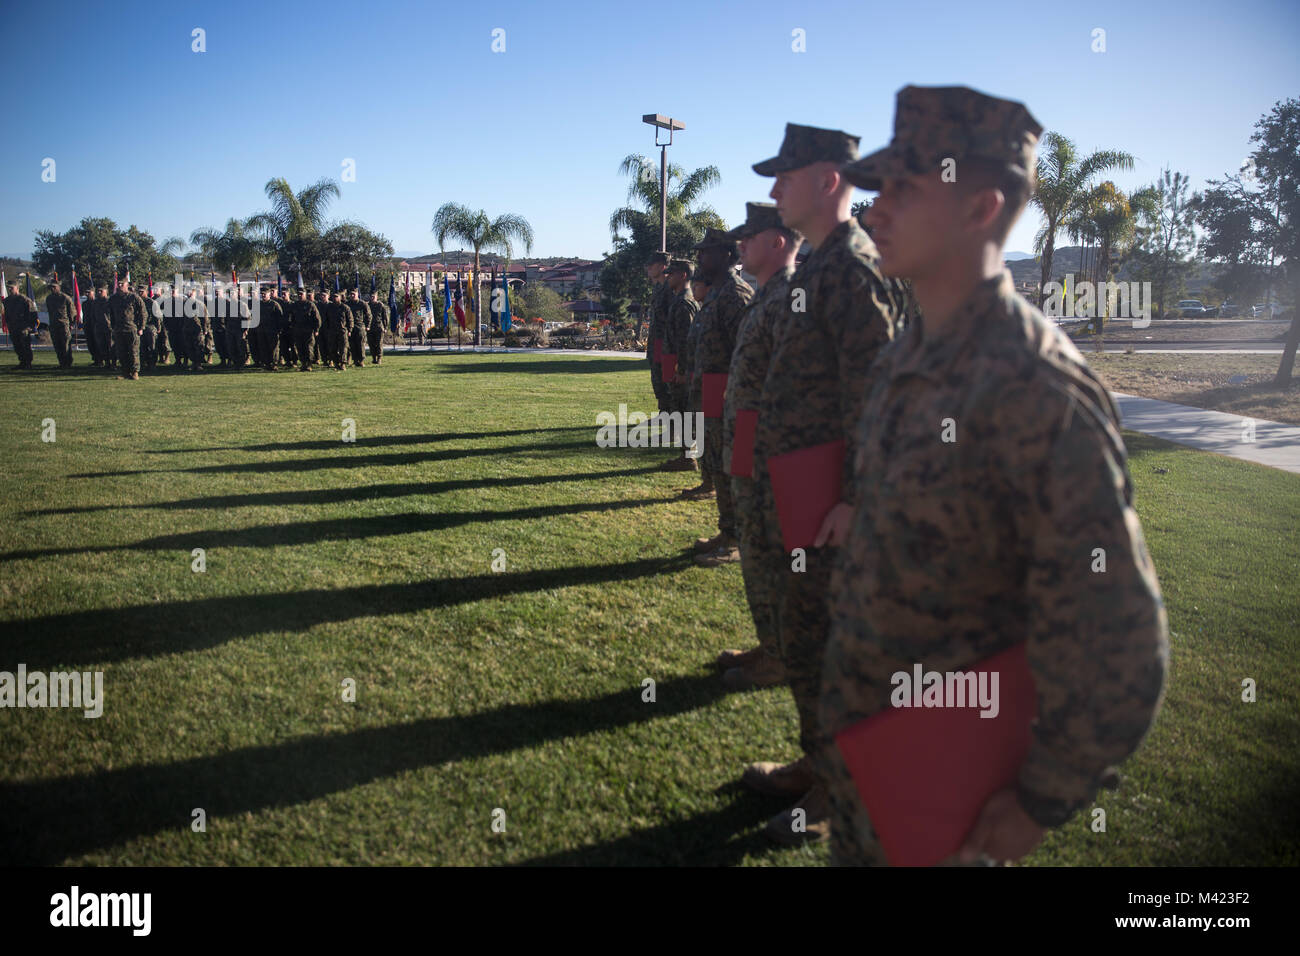 U.S. Marines with 1st Marine Logistics Group stand in formation after being recognized during the quarterly awards ceremony at Camp Pendleton, Calif., Feb. 8, 2018. The awards ceremony is conducted every quarter to highlight the achievements of the Marines and Sailors throughout the unit. (U.S. Marine Corps photo by Cpl. Adam Dublinske) Stock Photo